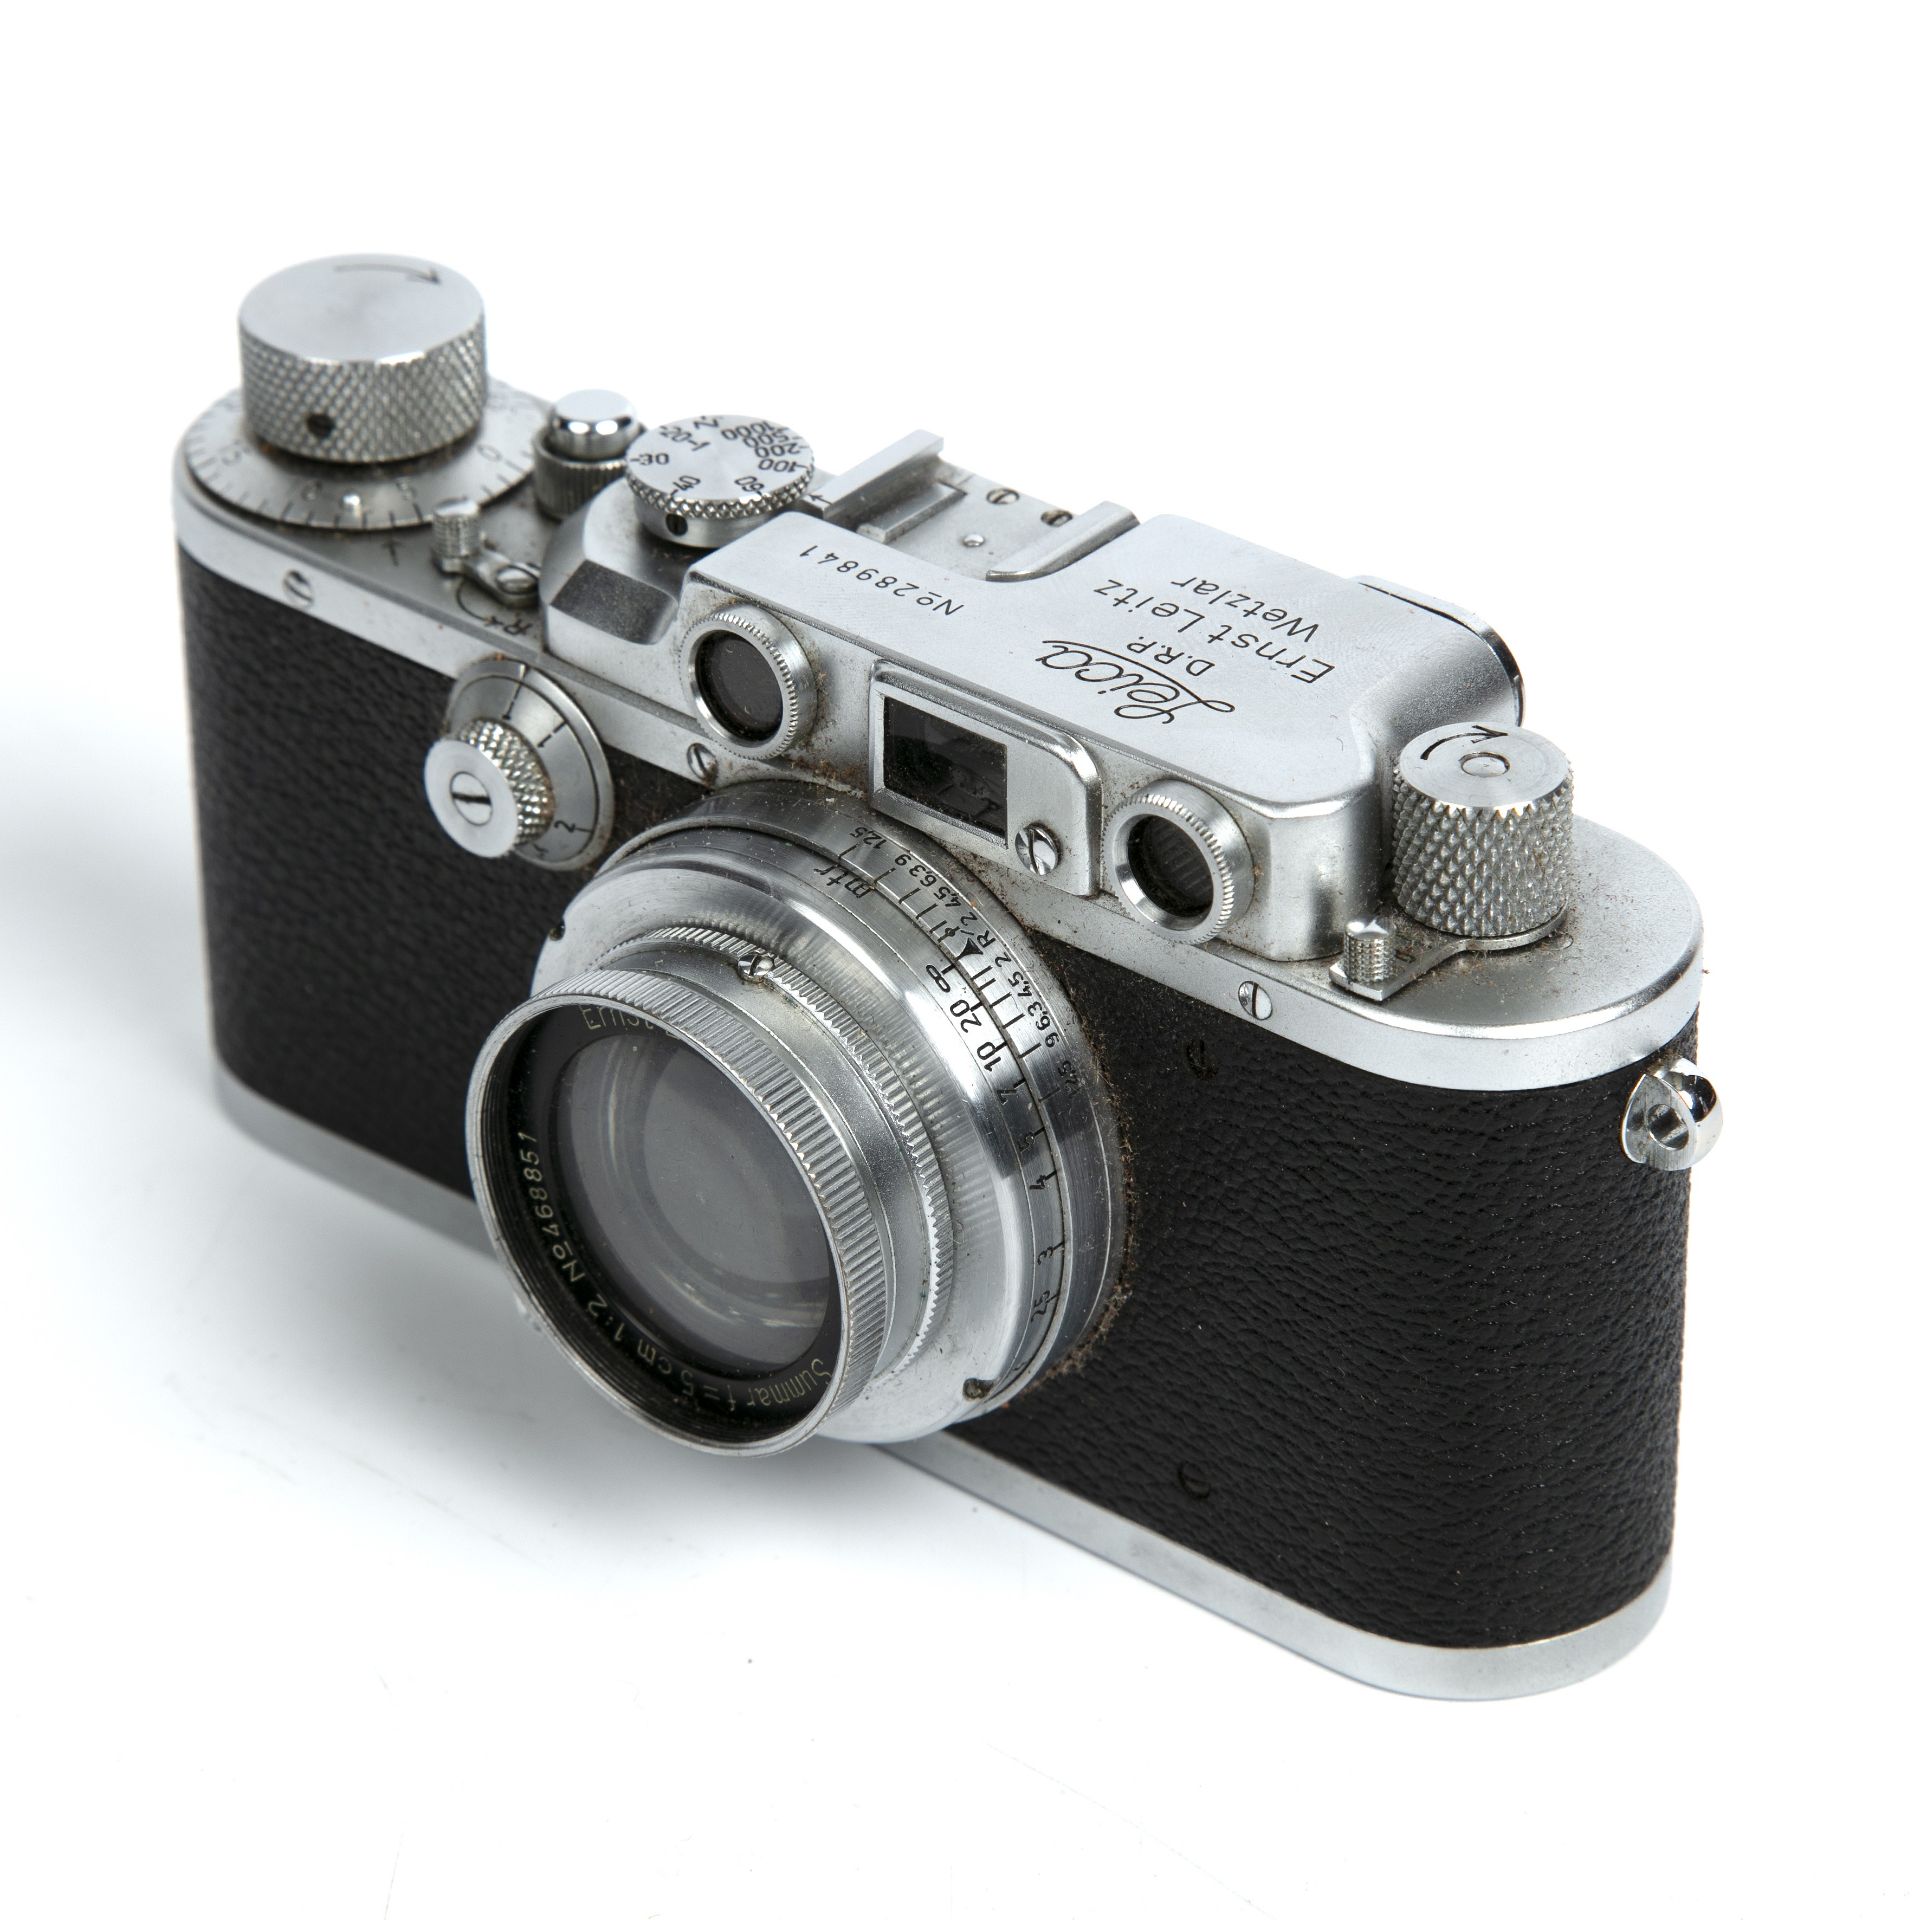 A Leica IIIb Rangefinder Camera, serial number 289841 with a Summar f=5cm no 468851 lens. - Image 2 of 5